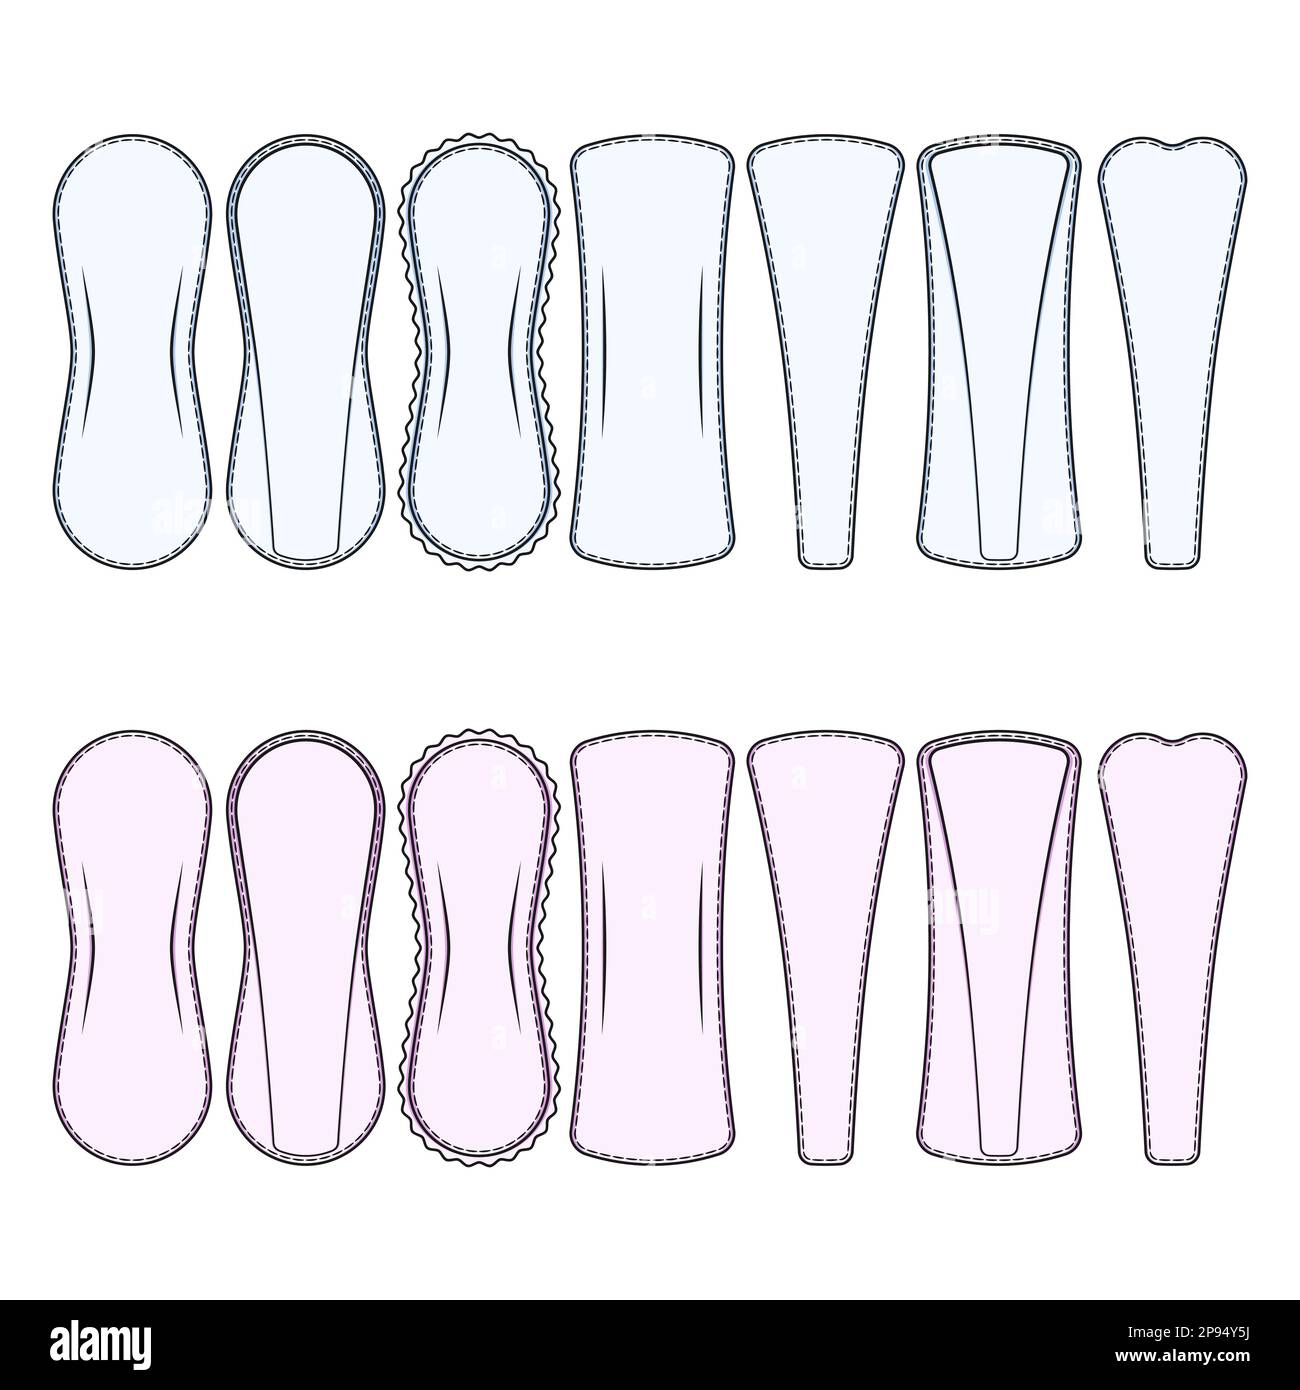 Set of color illustrations with panty liners. Isolated vector objects on white background. Stock Vector